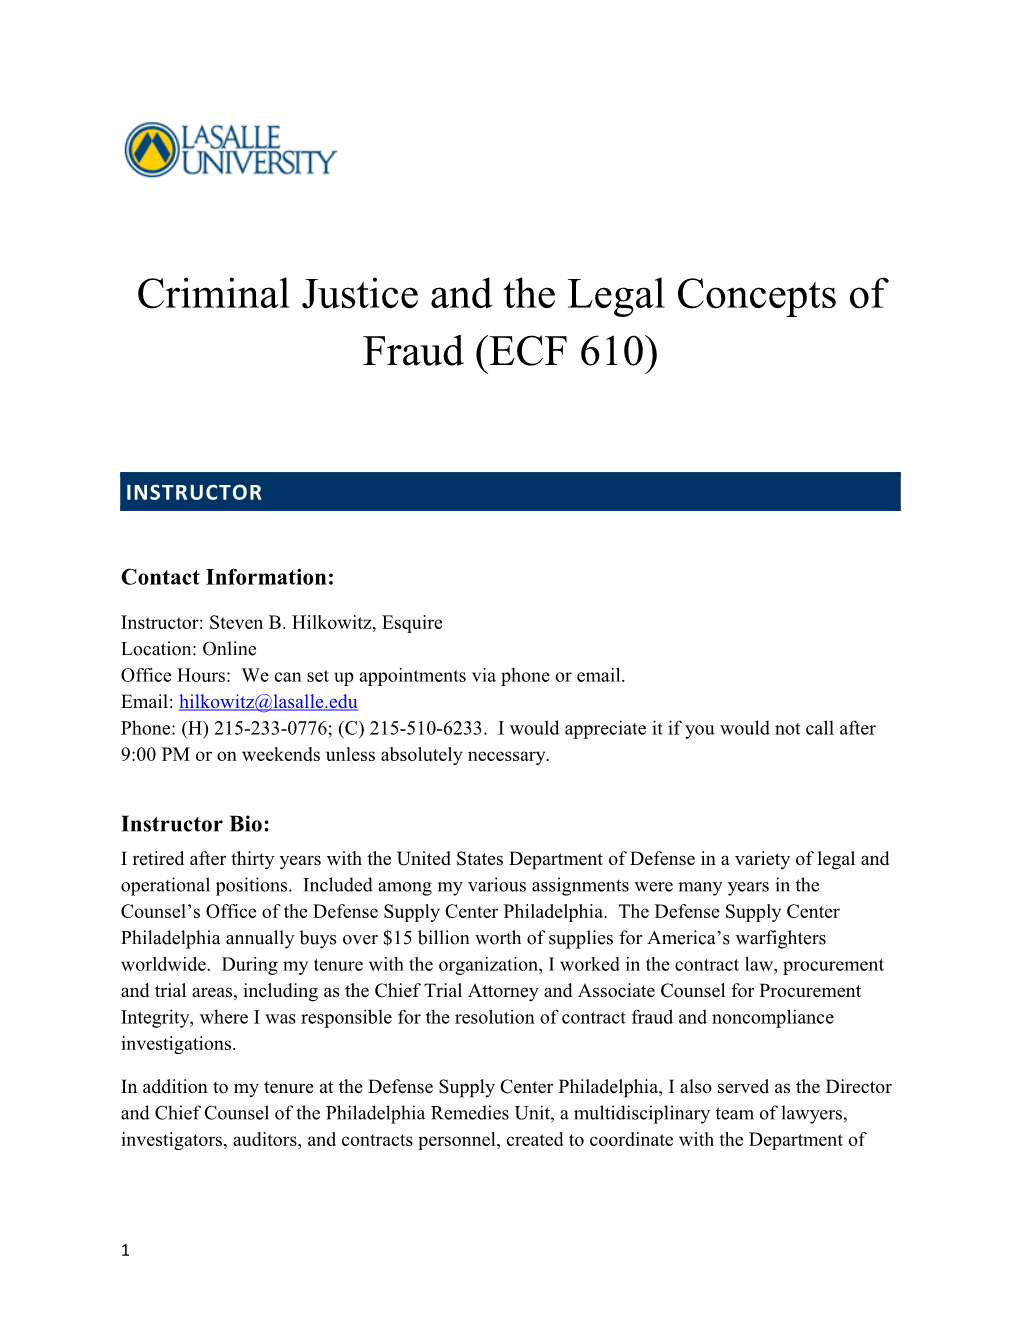 Criminal Justice and the Legal Concepts of Fraud (ECF 610)